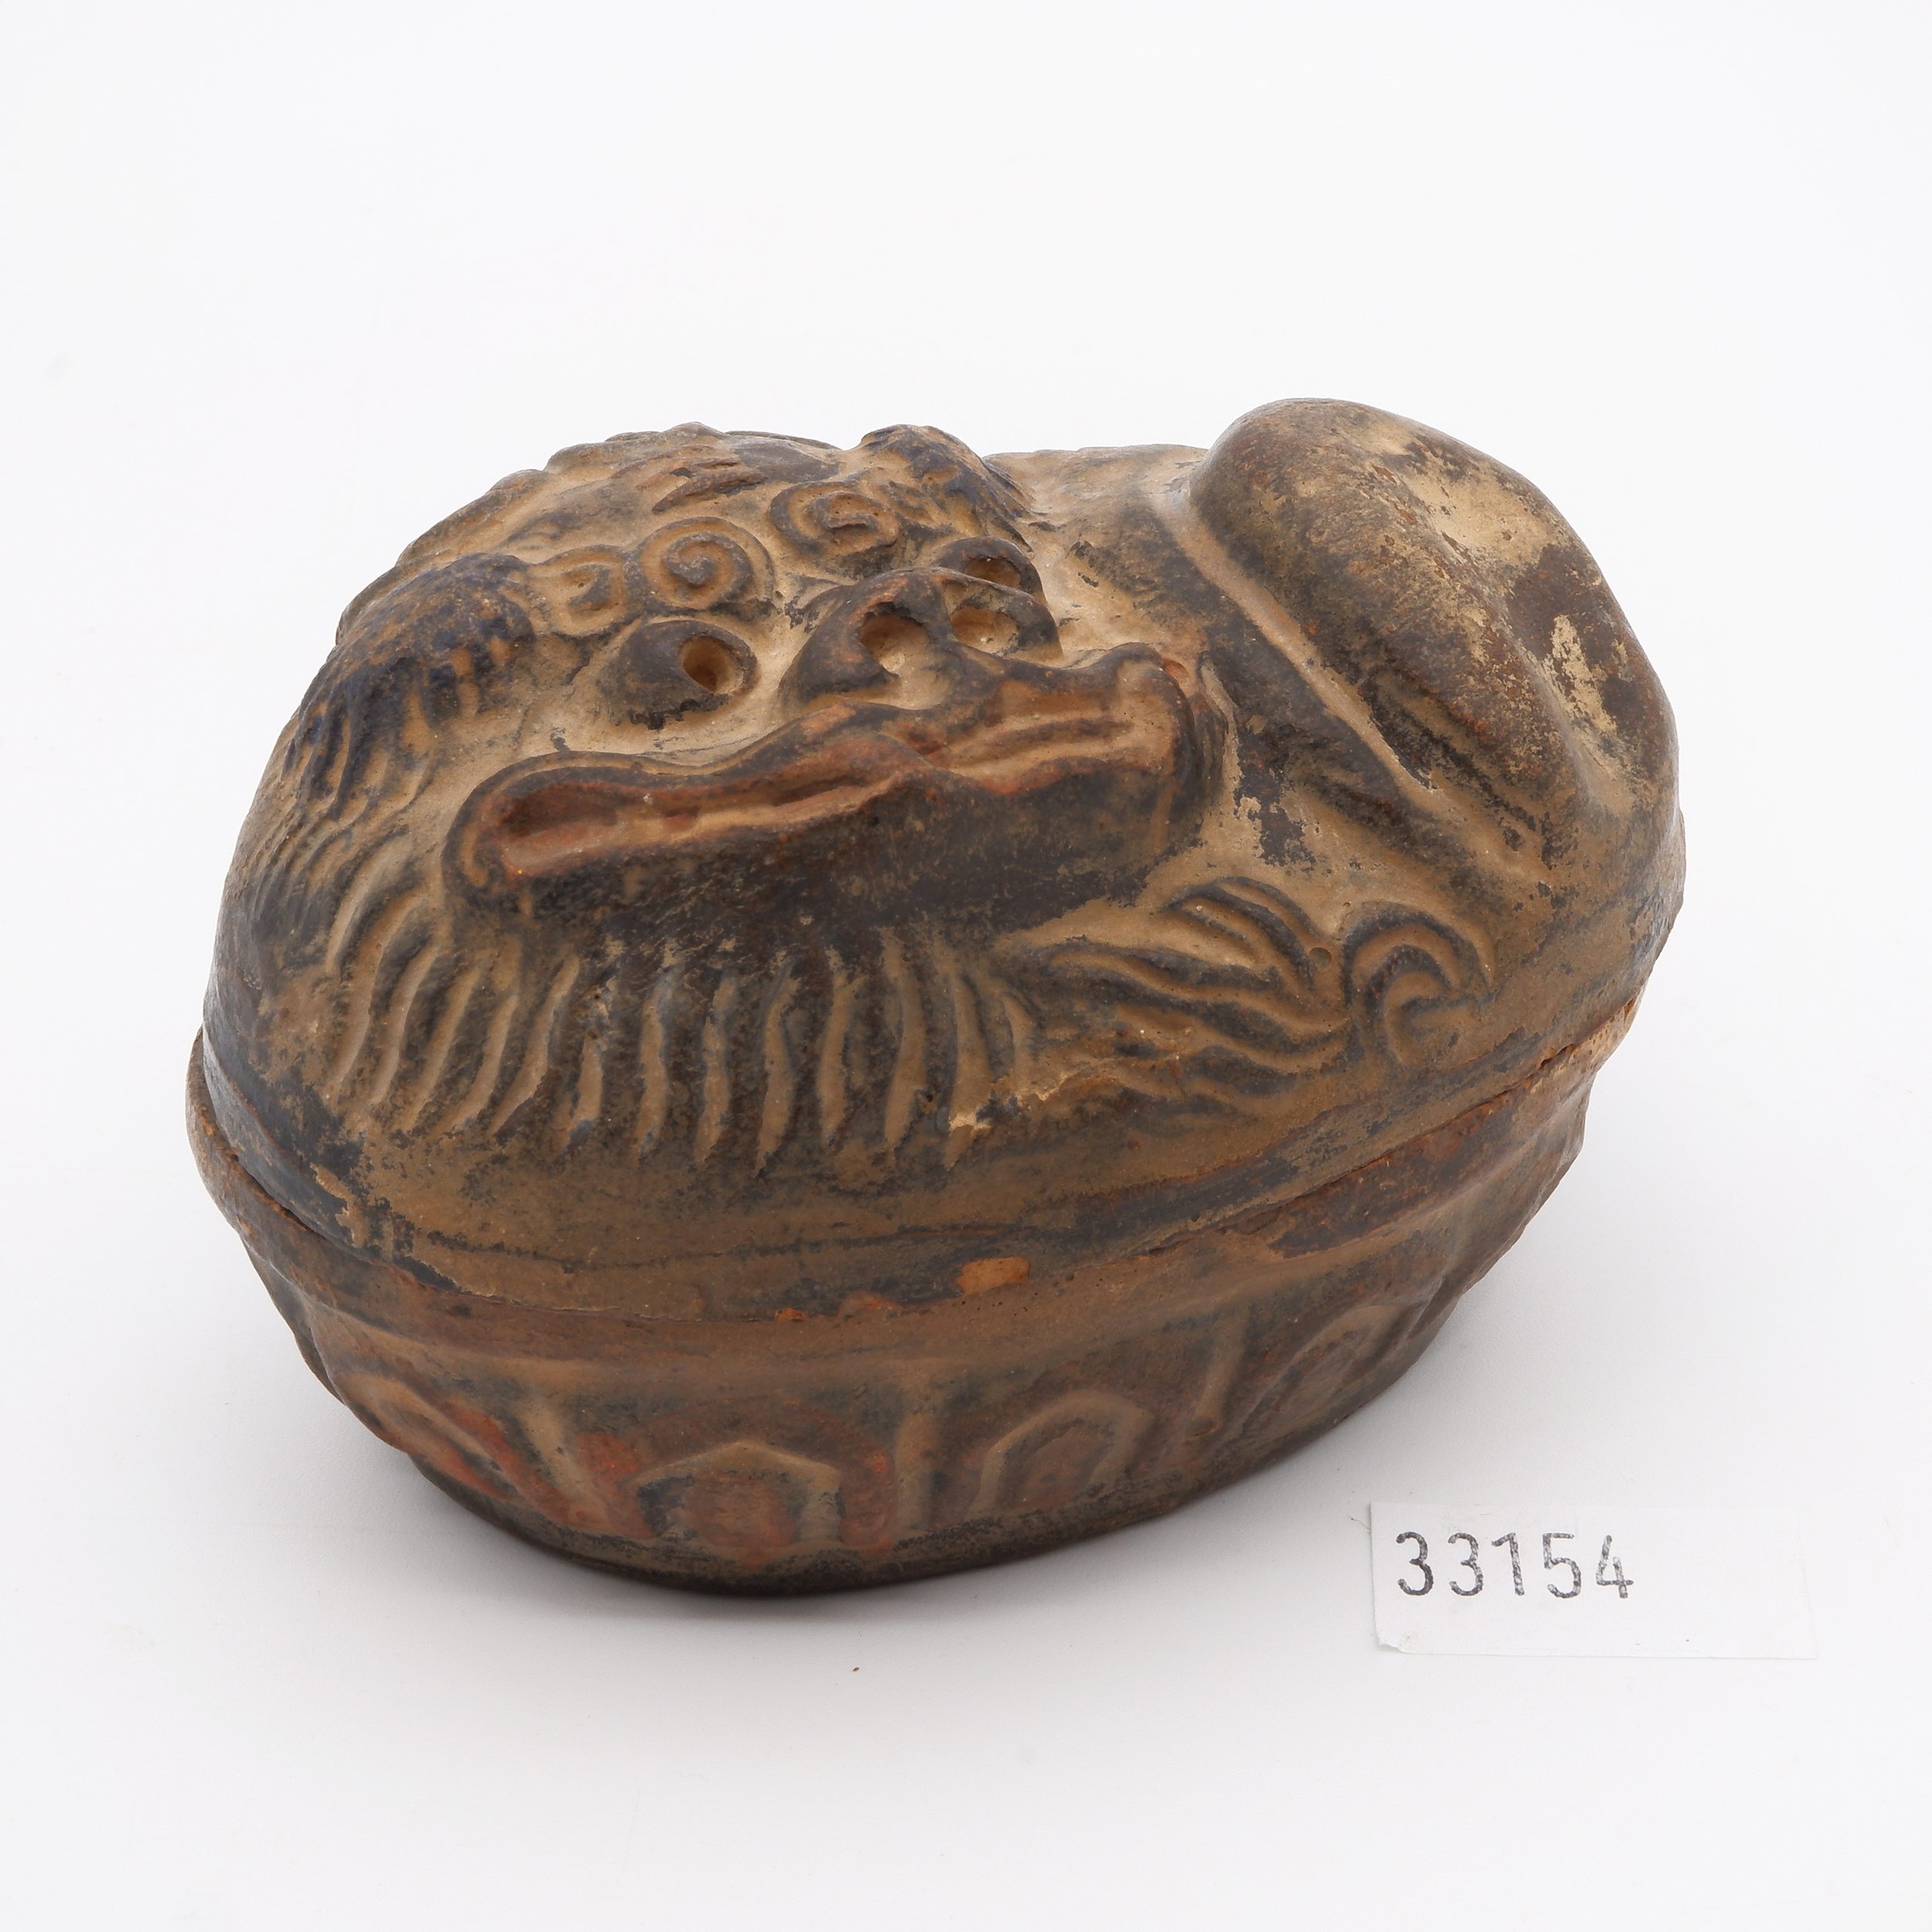 'Japanese Bizen Ware Red Pottery Incense Case (Kogo) Moulded with a Shishi Above Lotus Lappets'